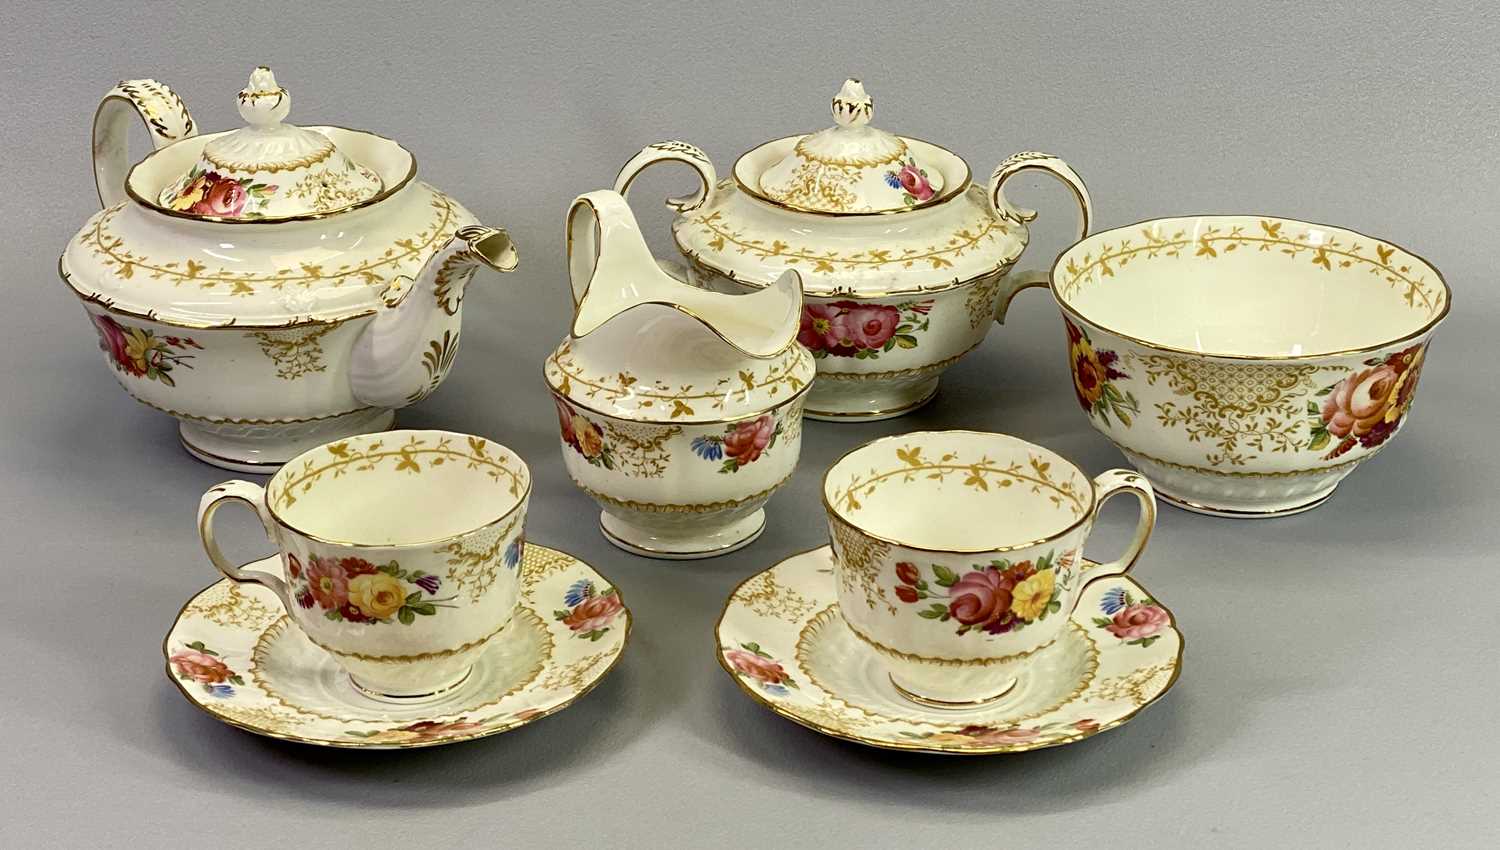 RADFORDS-FENTON CHINA TEAWARE, 42 PIECE - to include teapot and cover, sucrier and cover, milk jug - Image 2 of 2